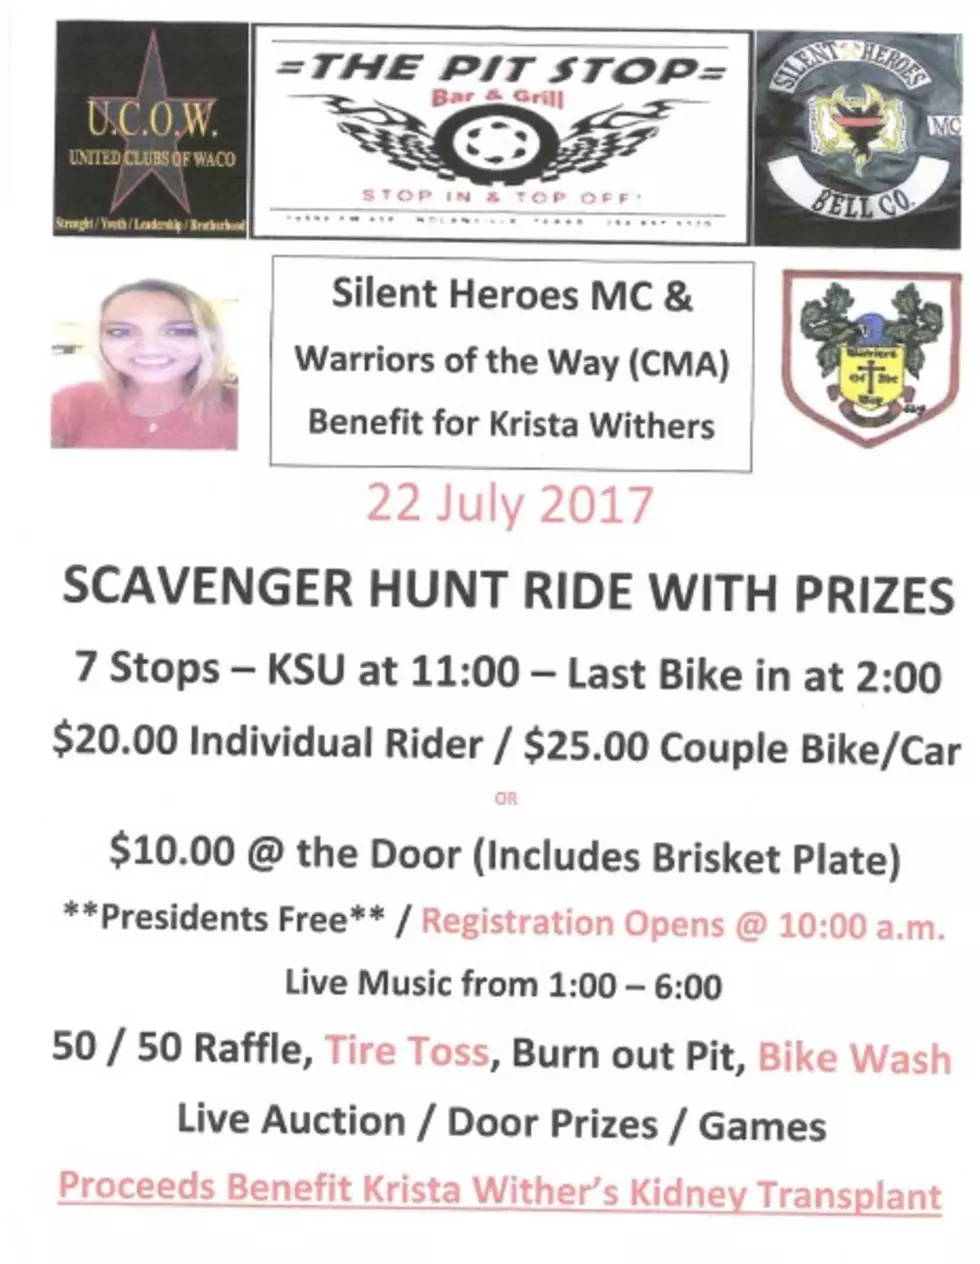 Benefit Scavenger Hunt Ride Coming up Saturday, July 22nd